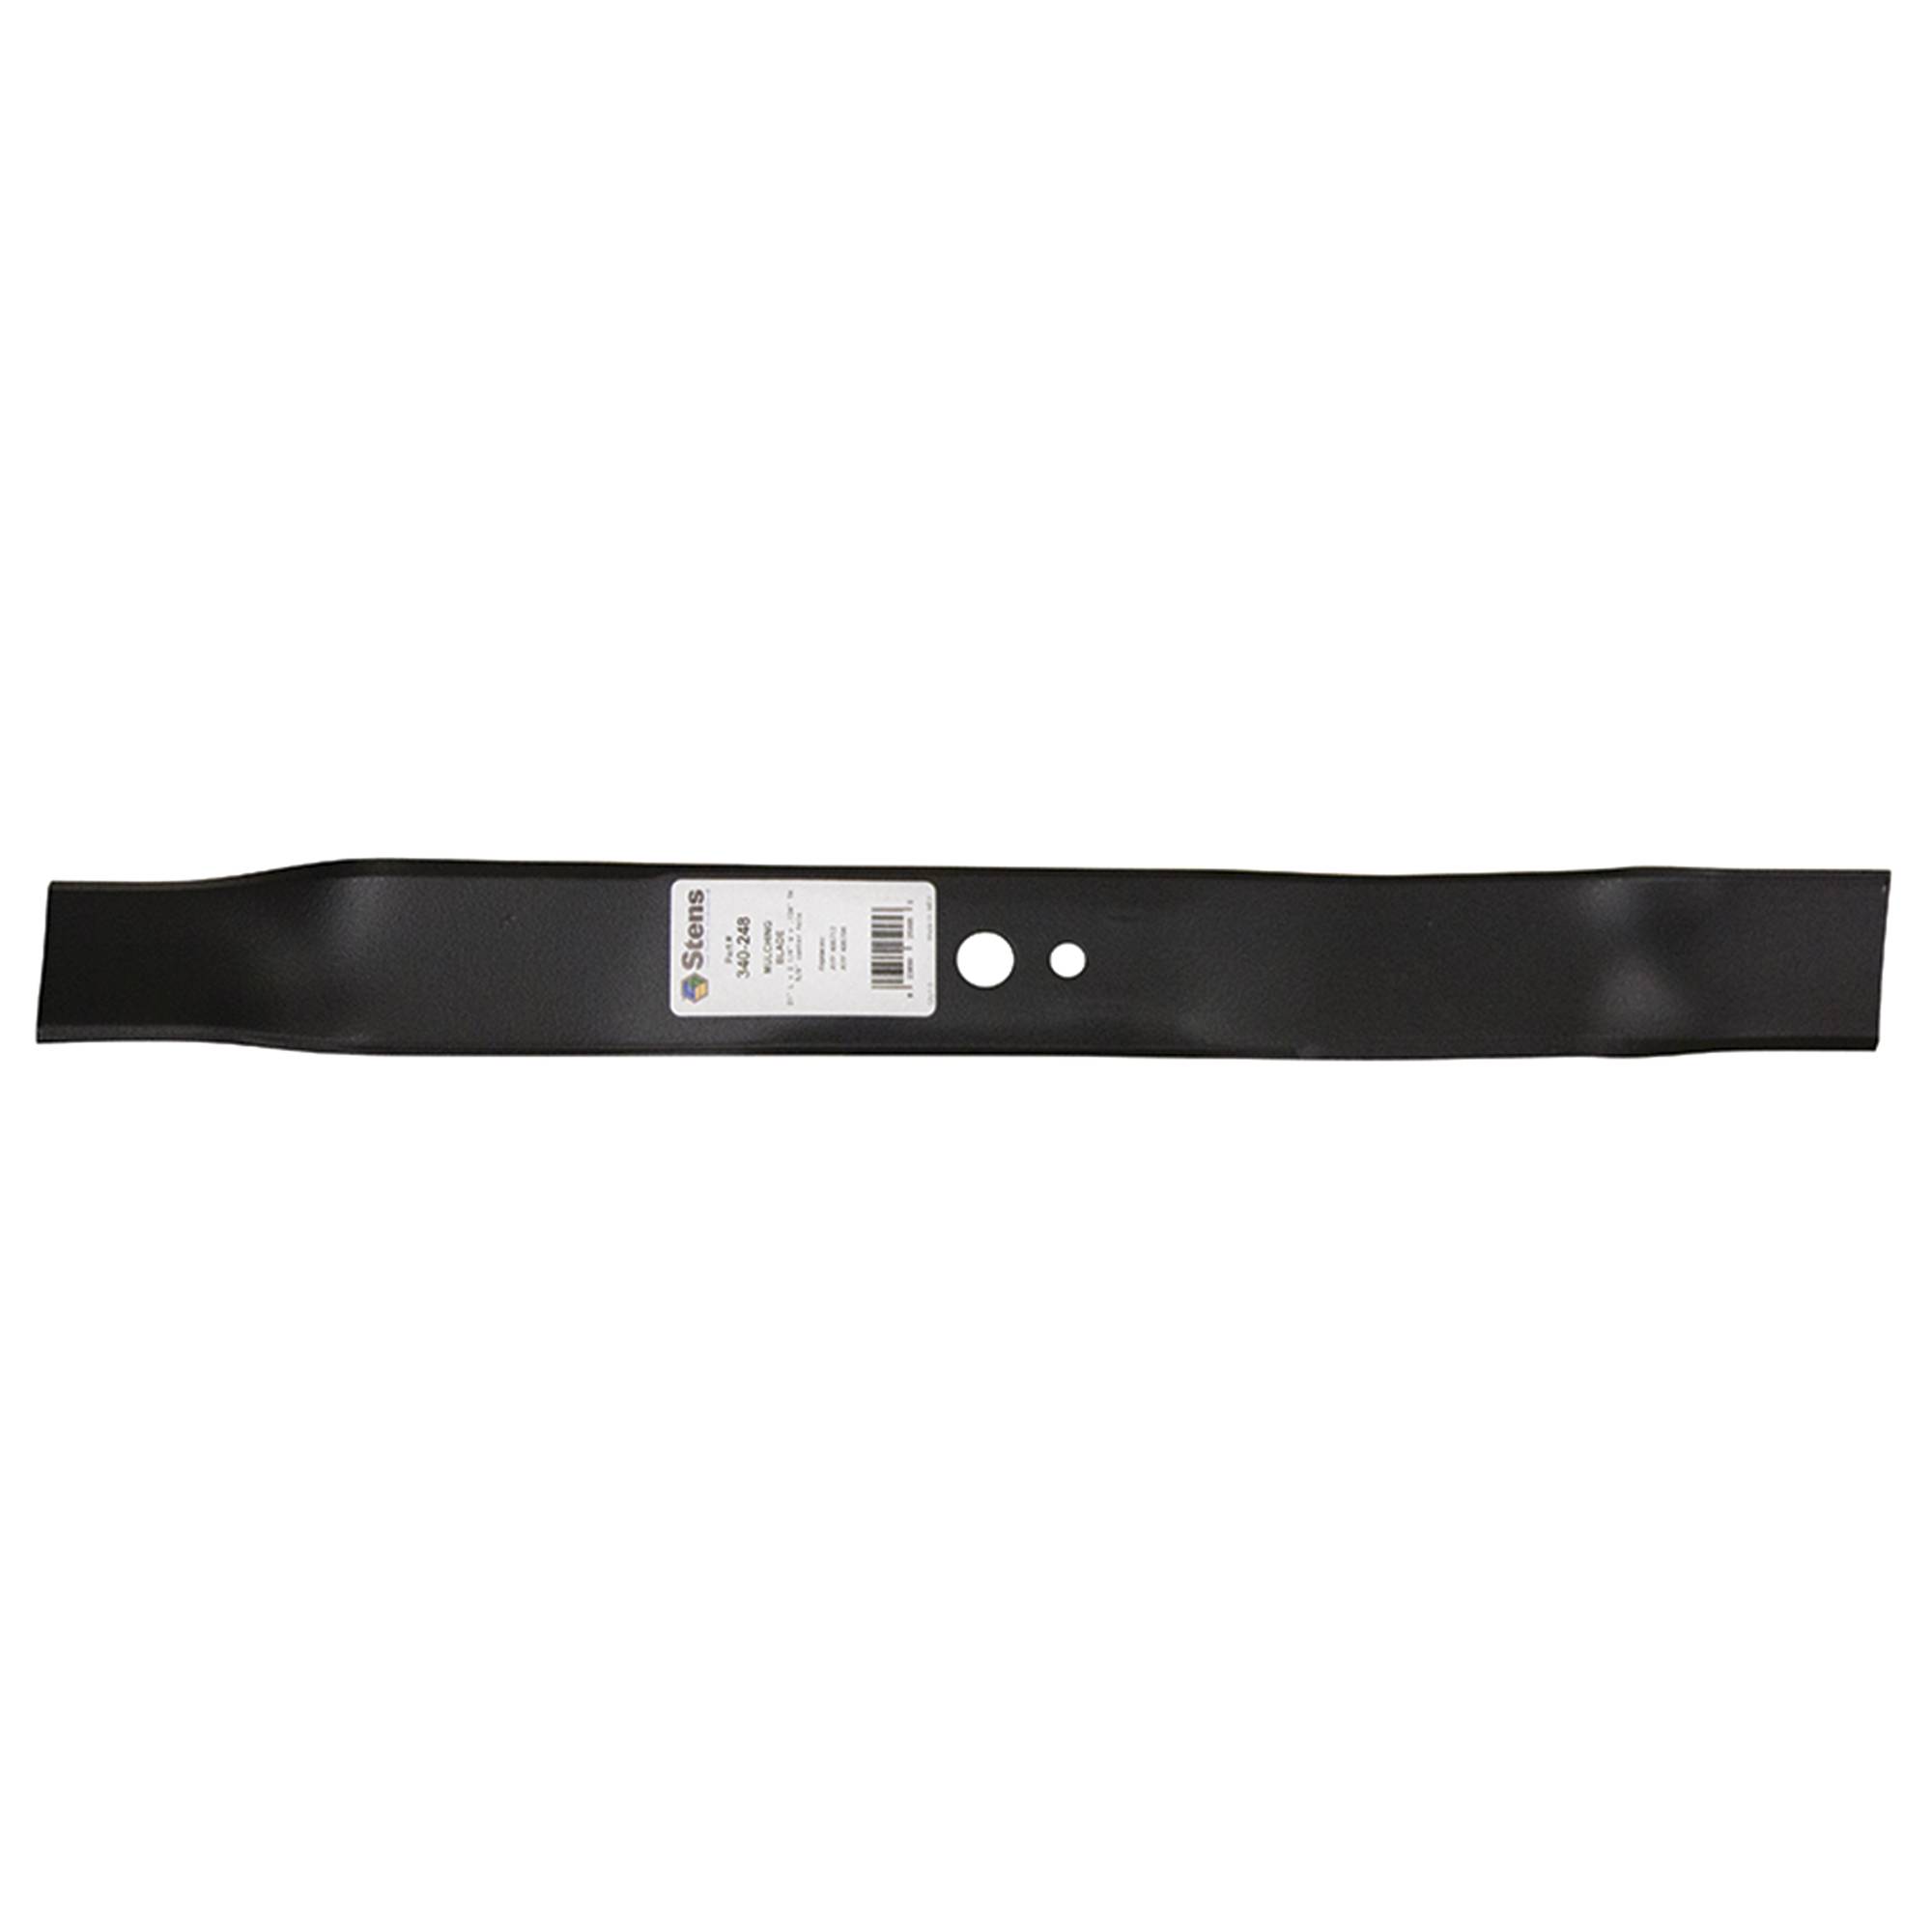 New Stens Mulching Blade Replaces, AYP 532406712 , 340-248 - image 1 of 4